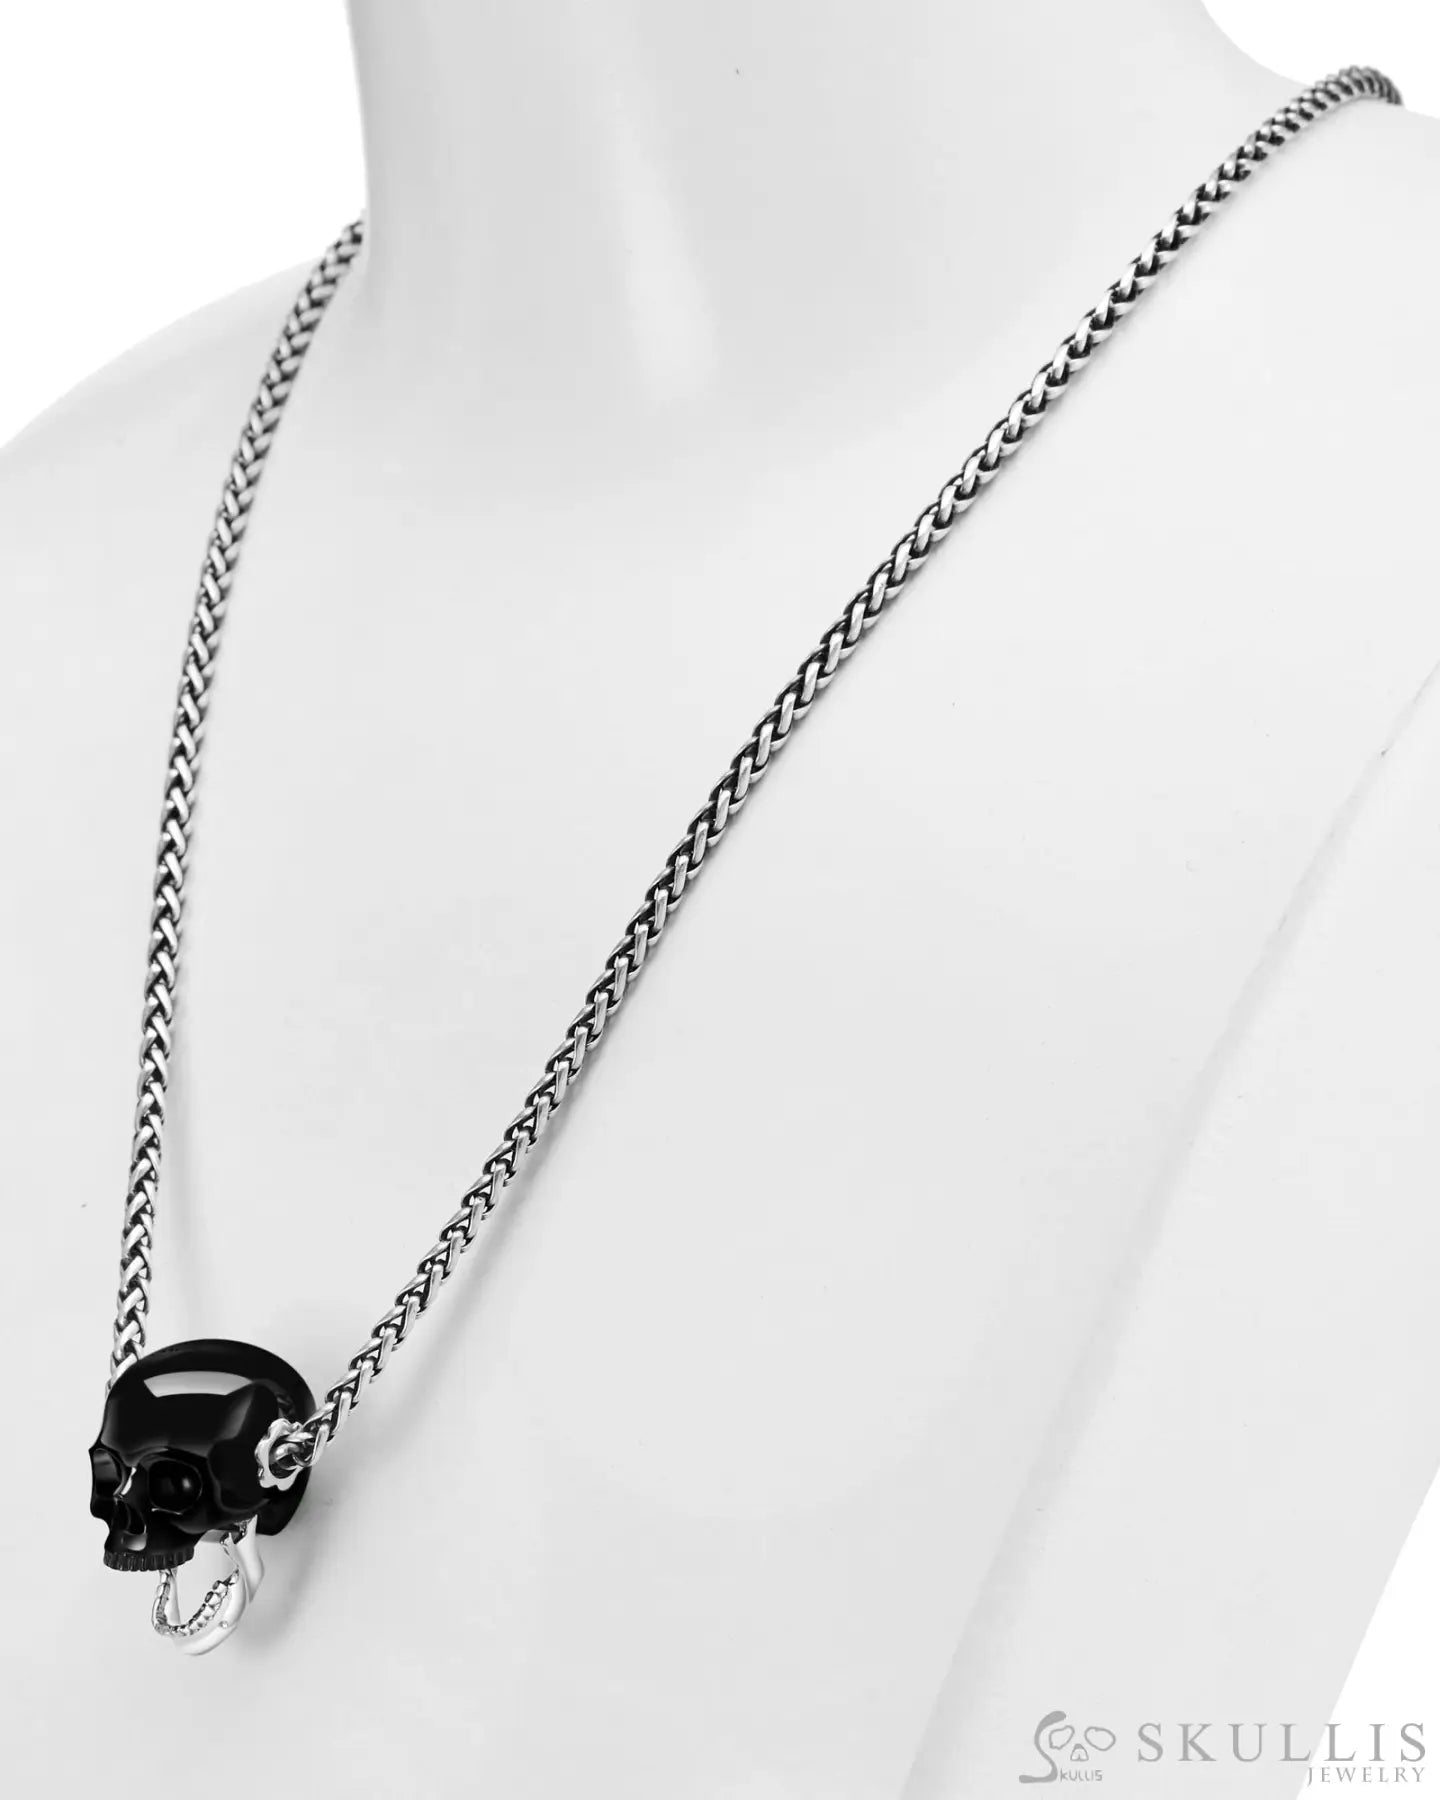 Gem Skull Pendant Necklace Of Black Obsidian Carved Skull With Detachable Silver Jaw In